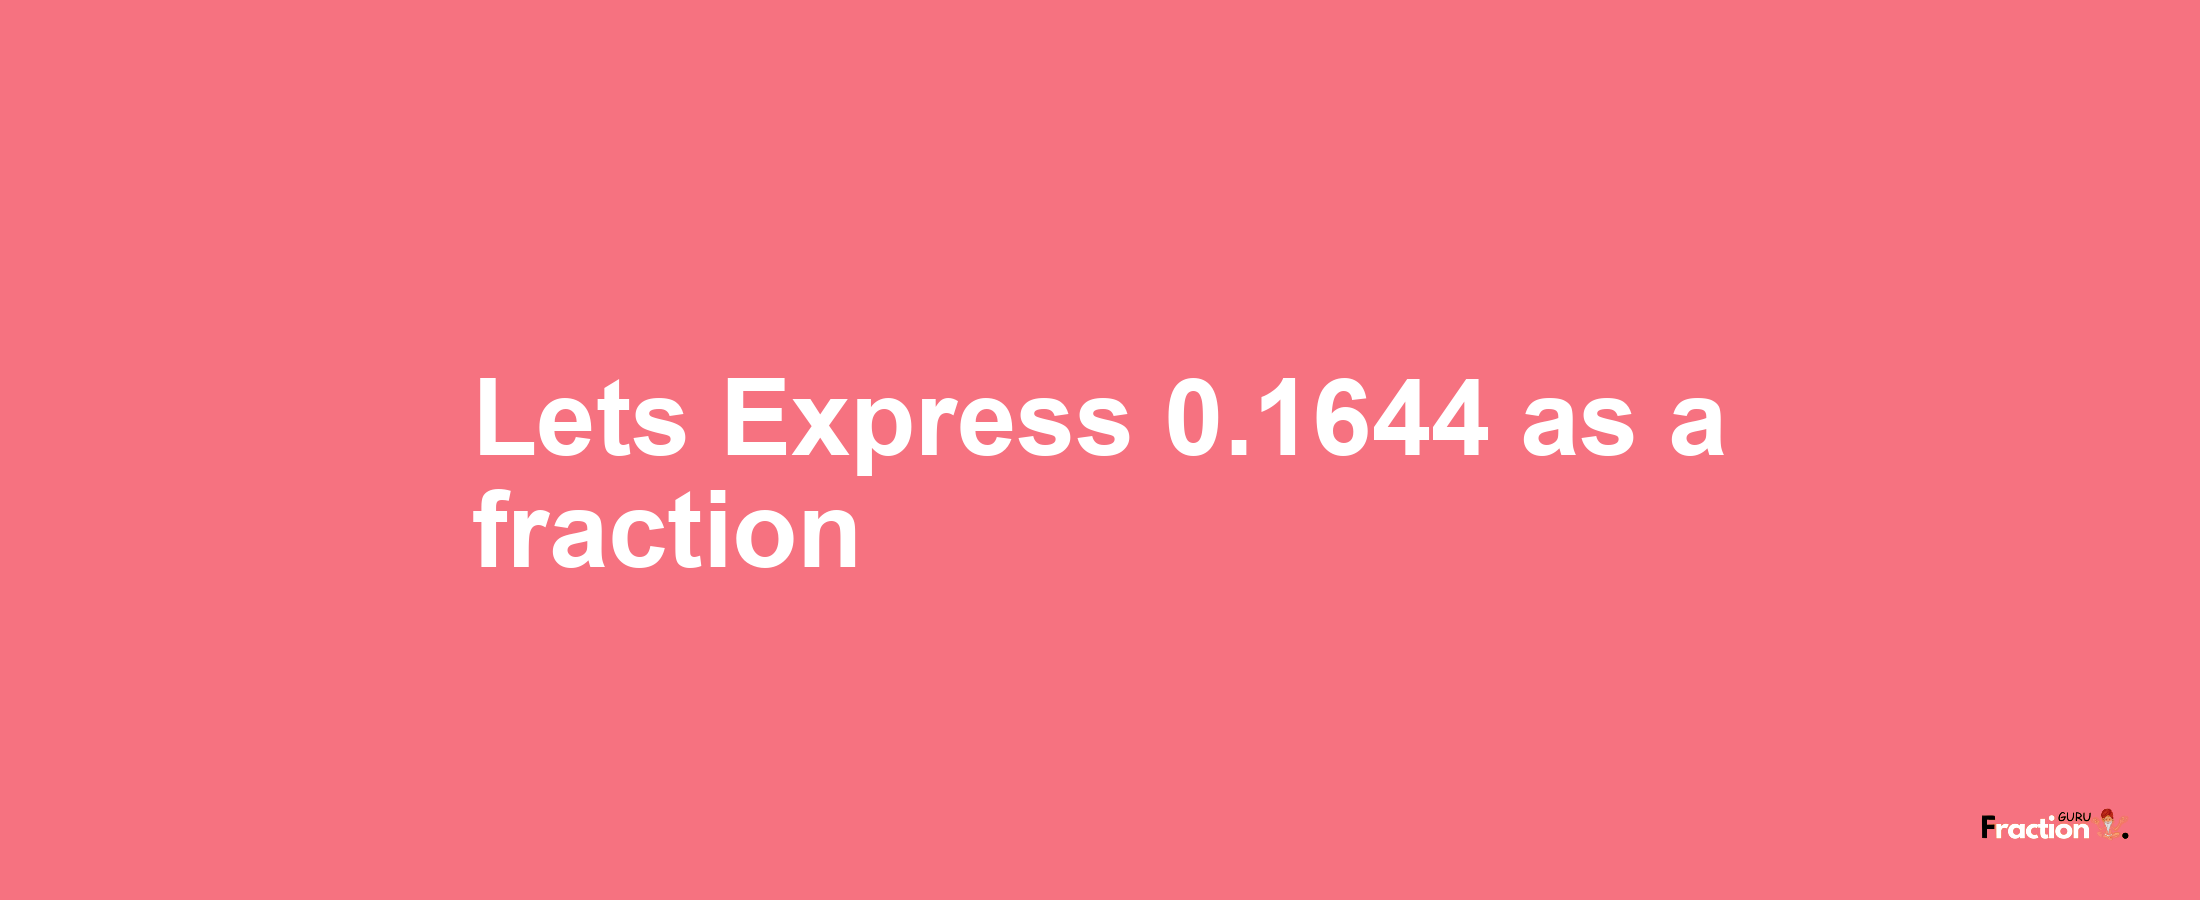 Lets Express 0.1644 as afraction